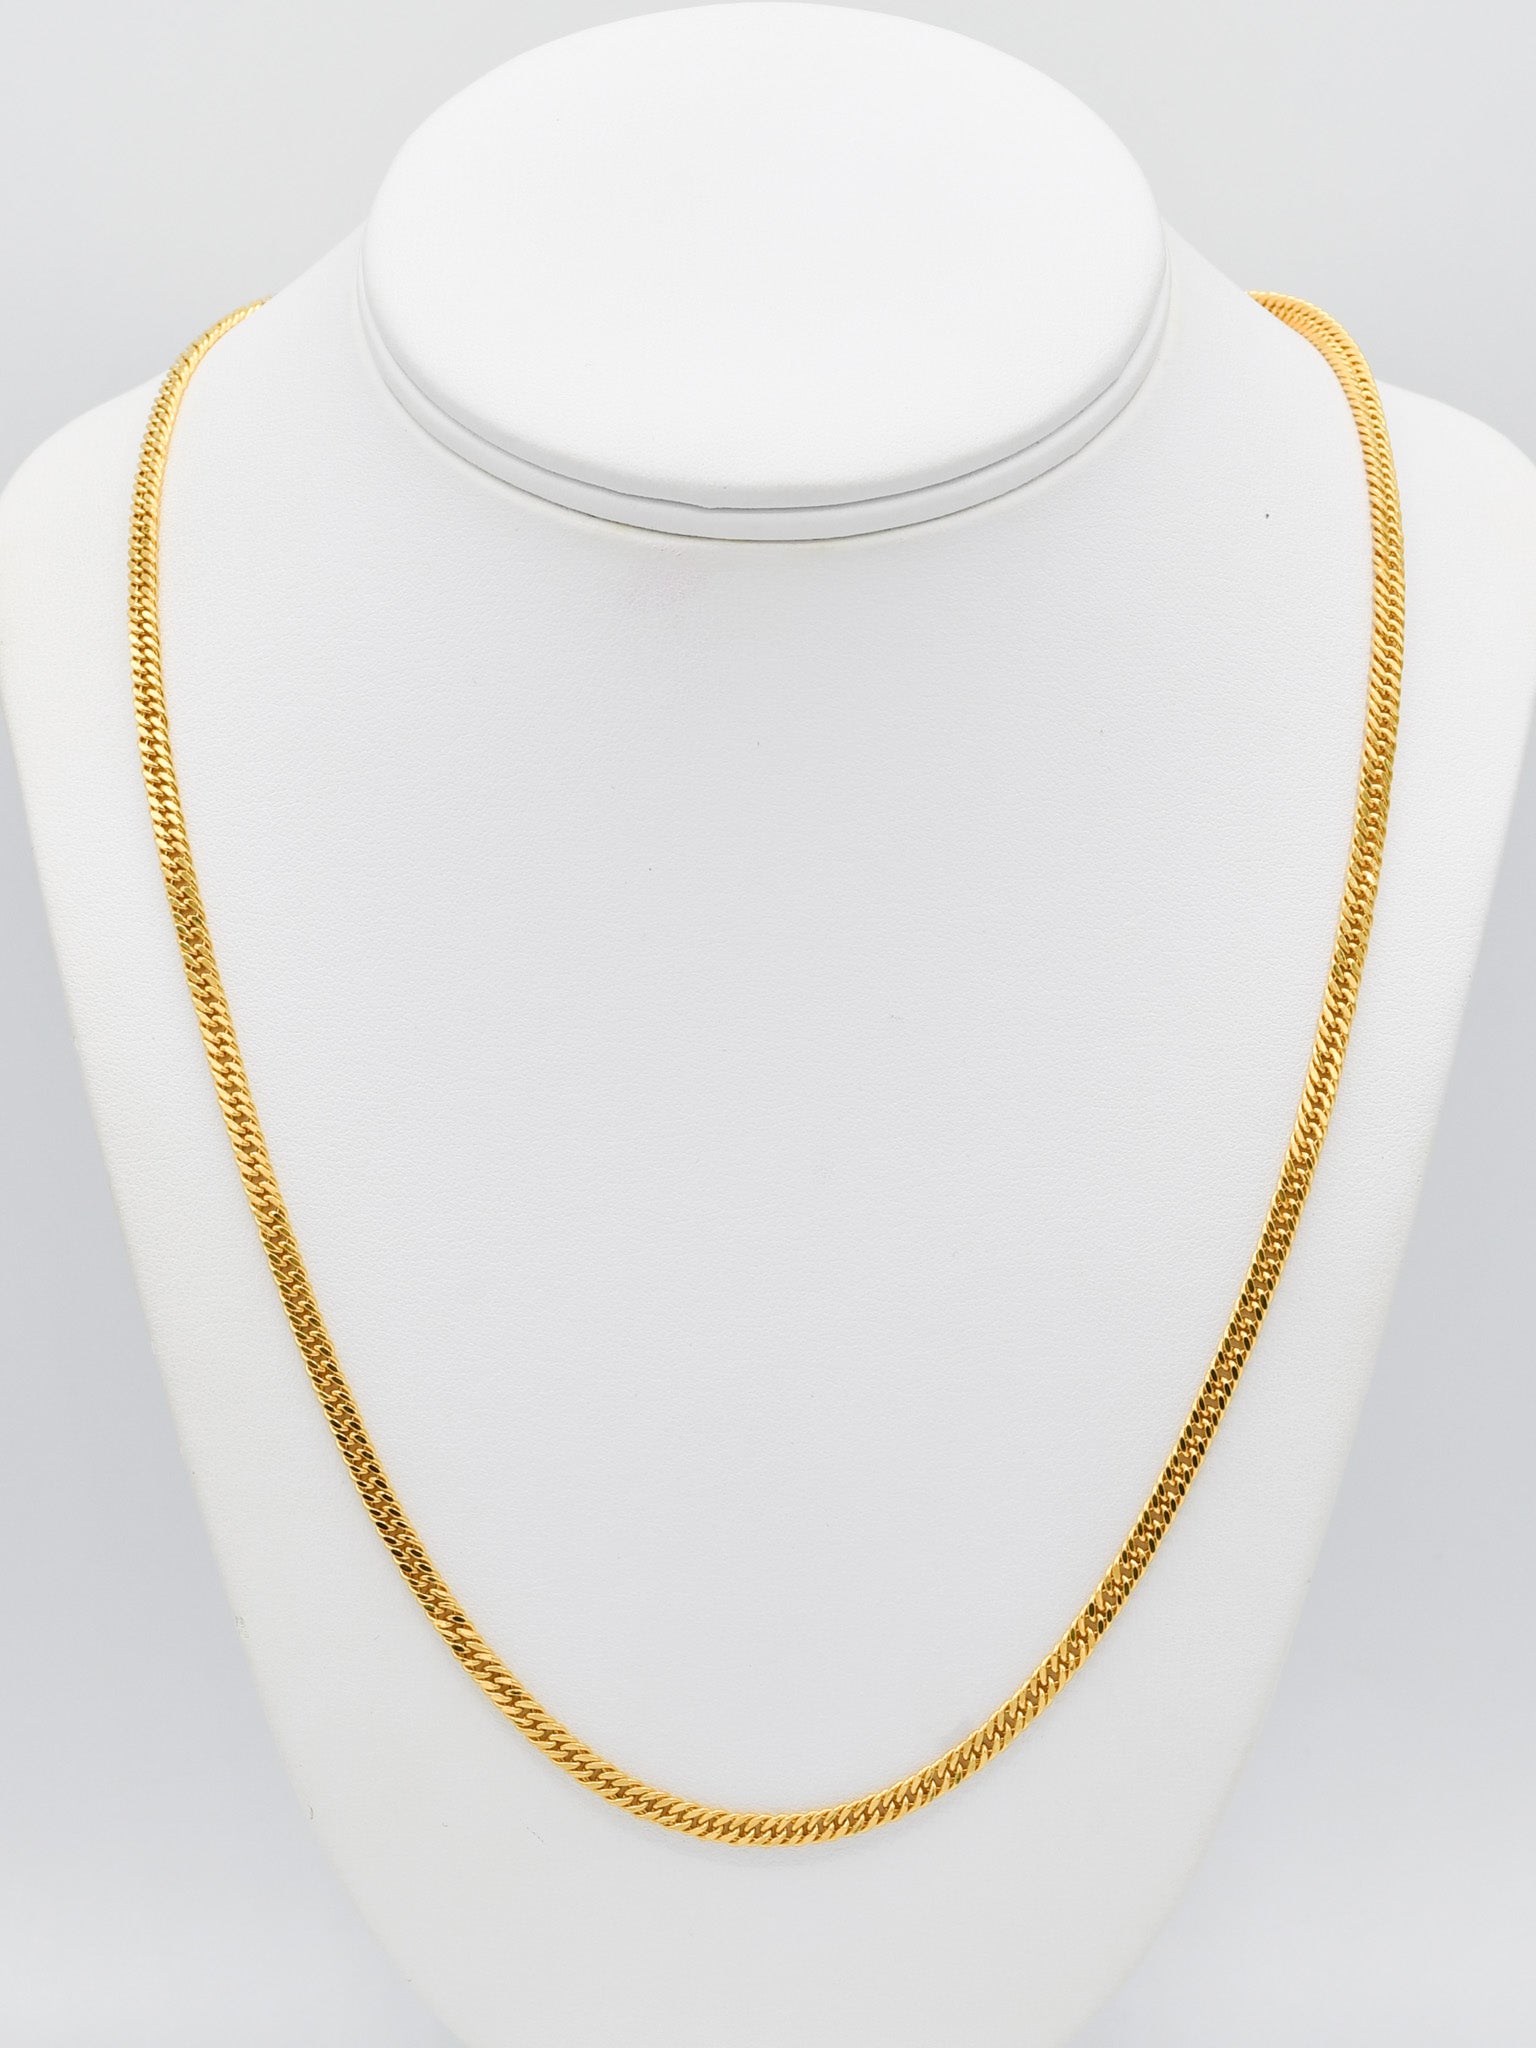 22ct Gold Hollow Curb Chain - Roop Darshan